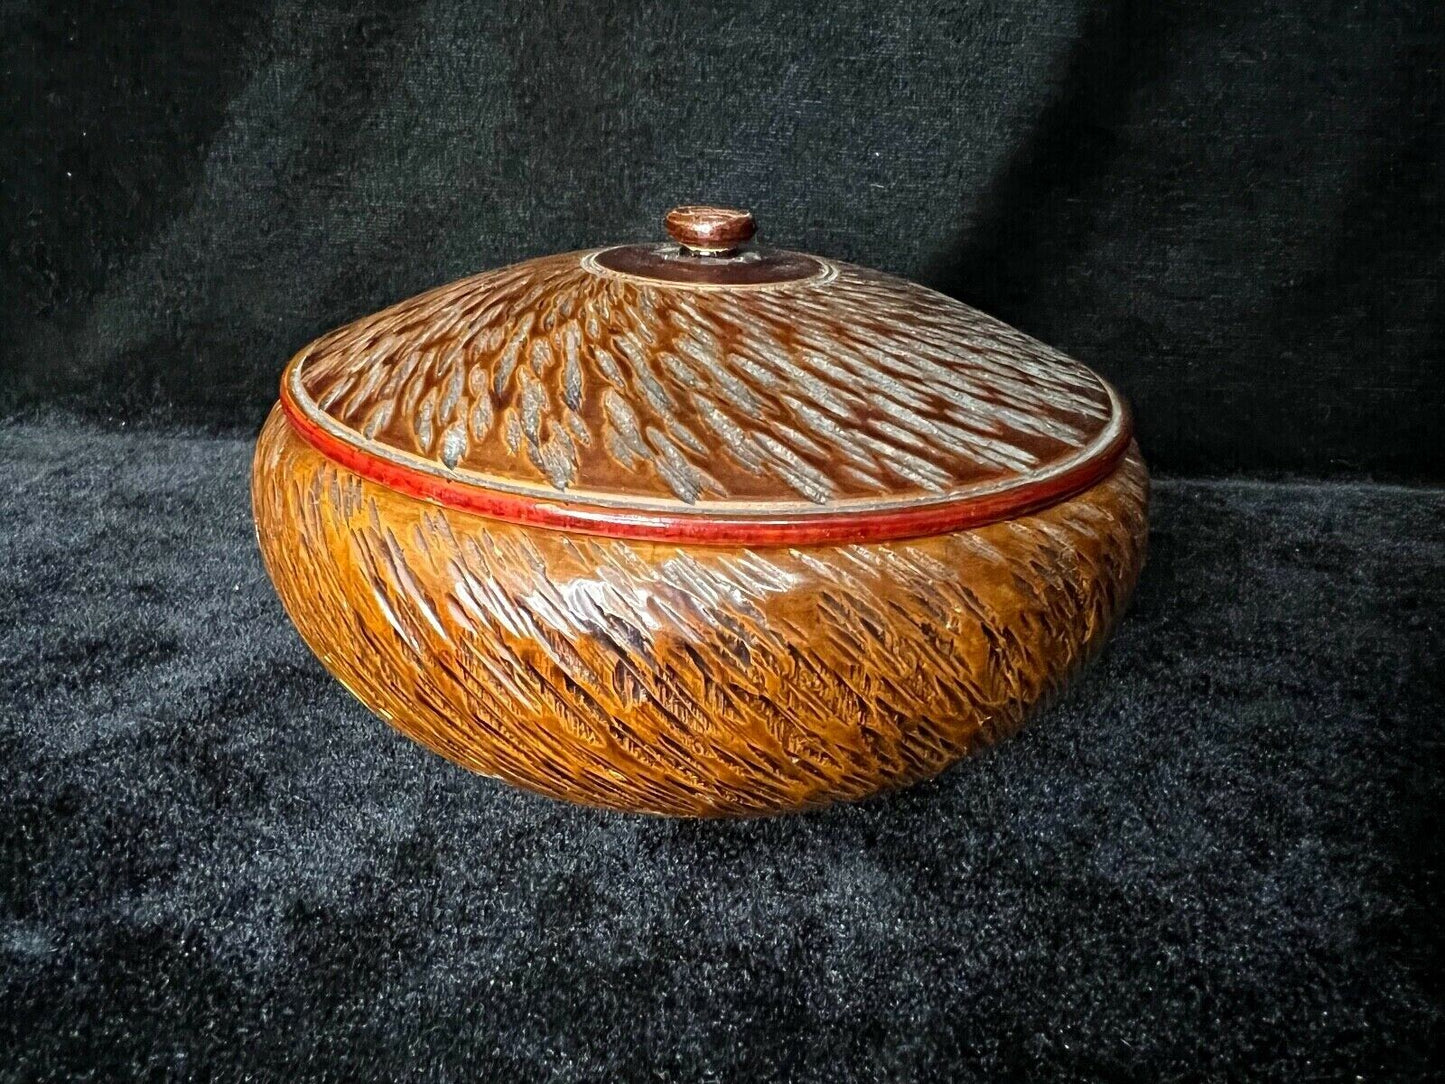 Vintage Japanese Hand Carved Round Lidded Bowl W/ Red Lacquer Interior 5.5"